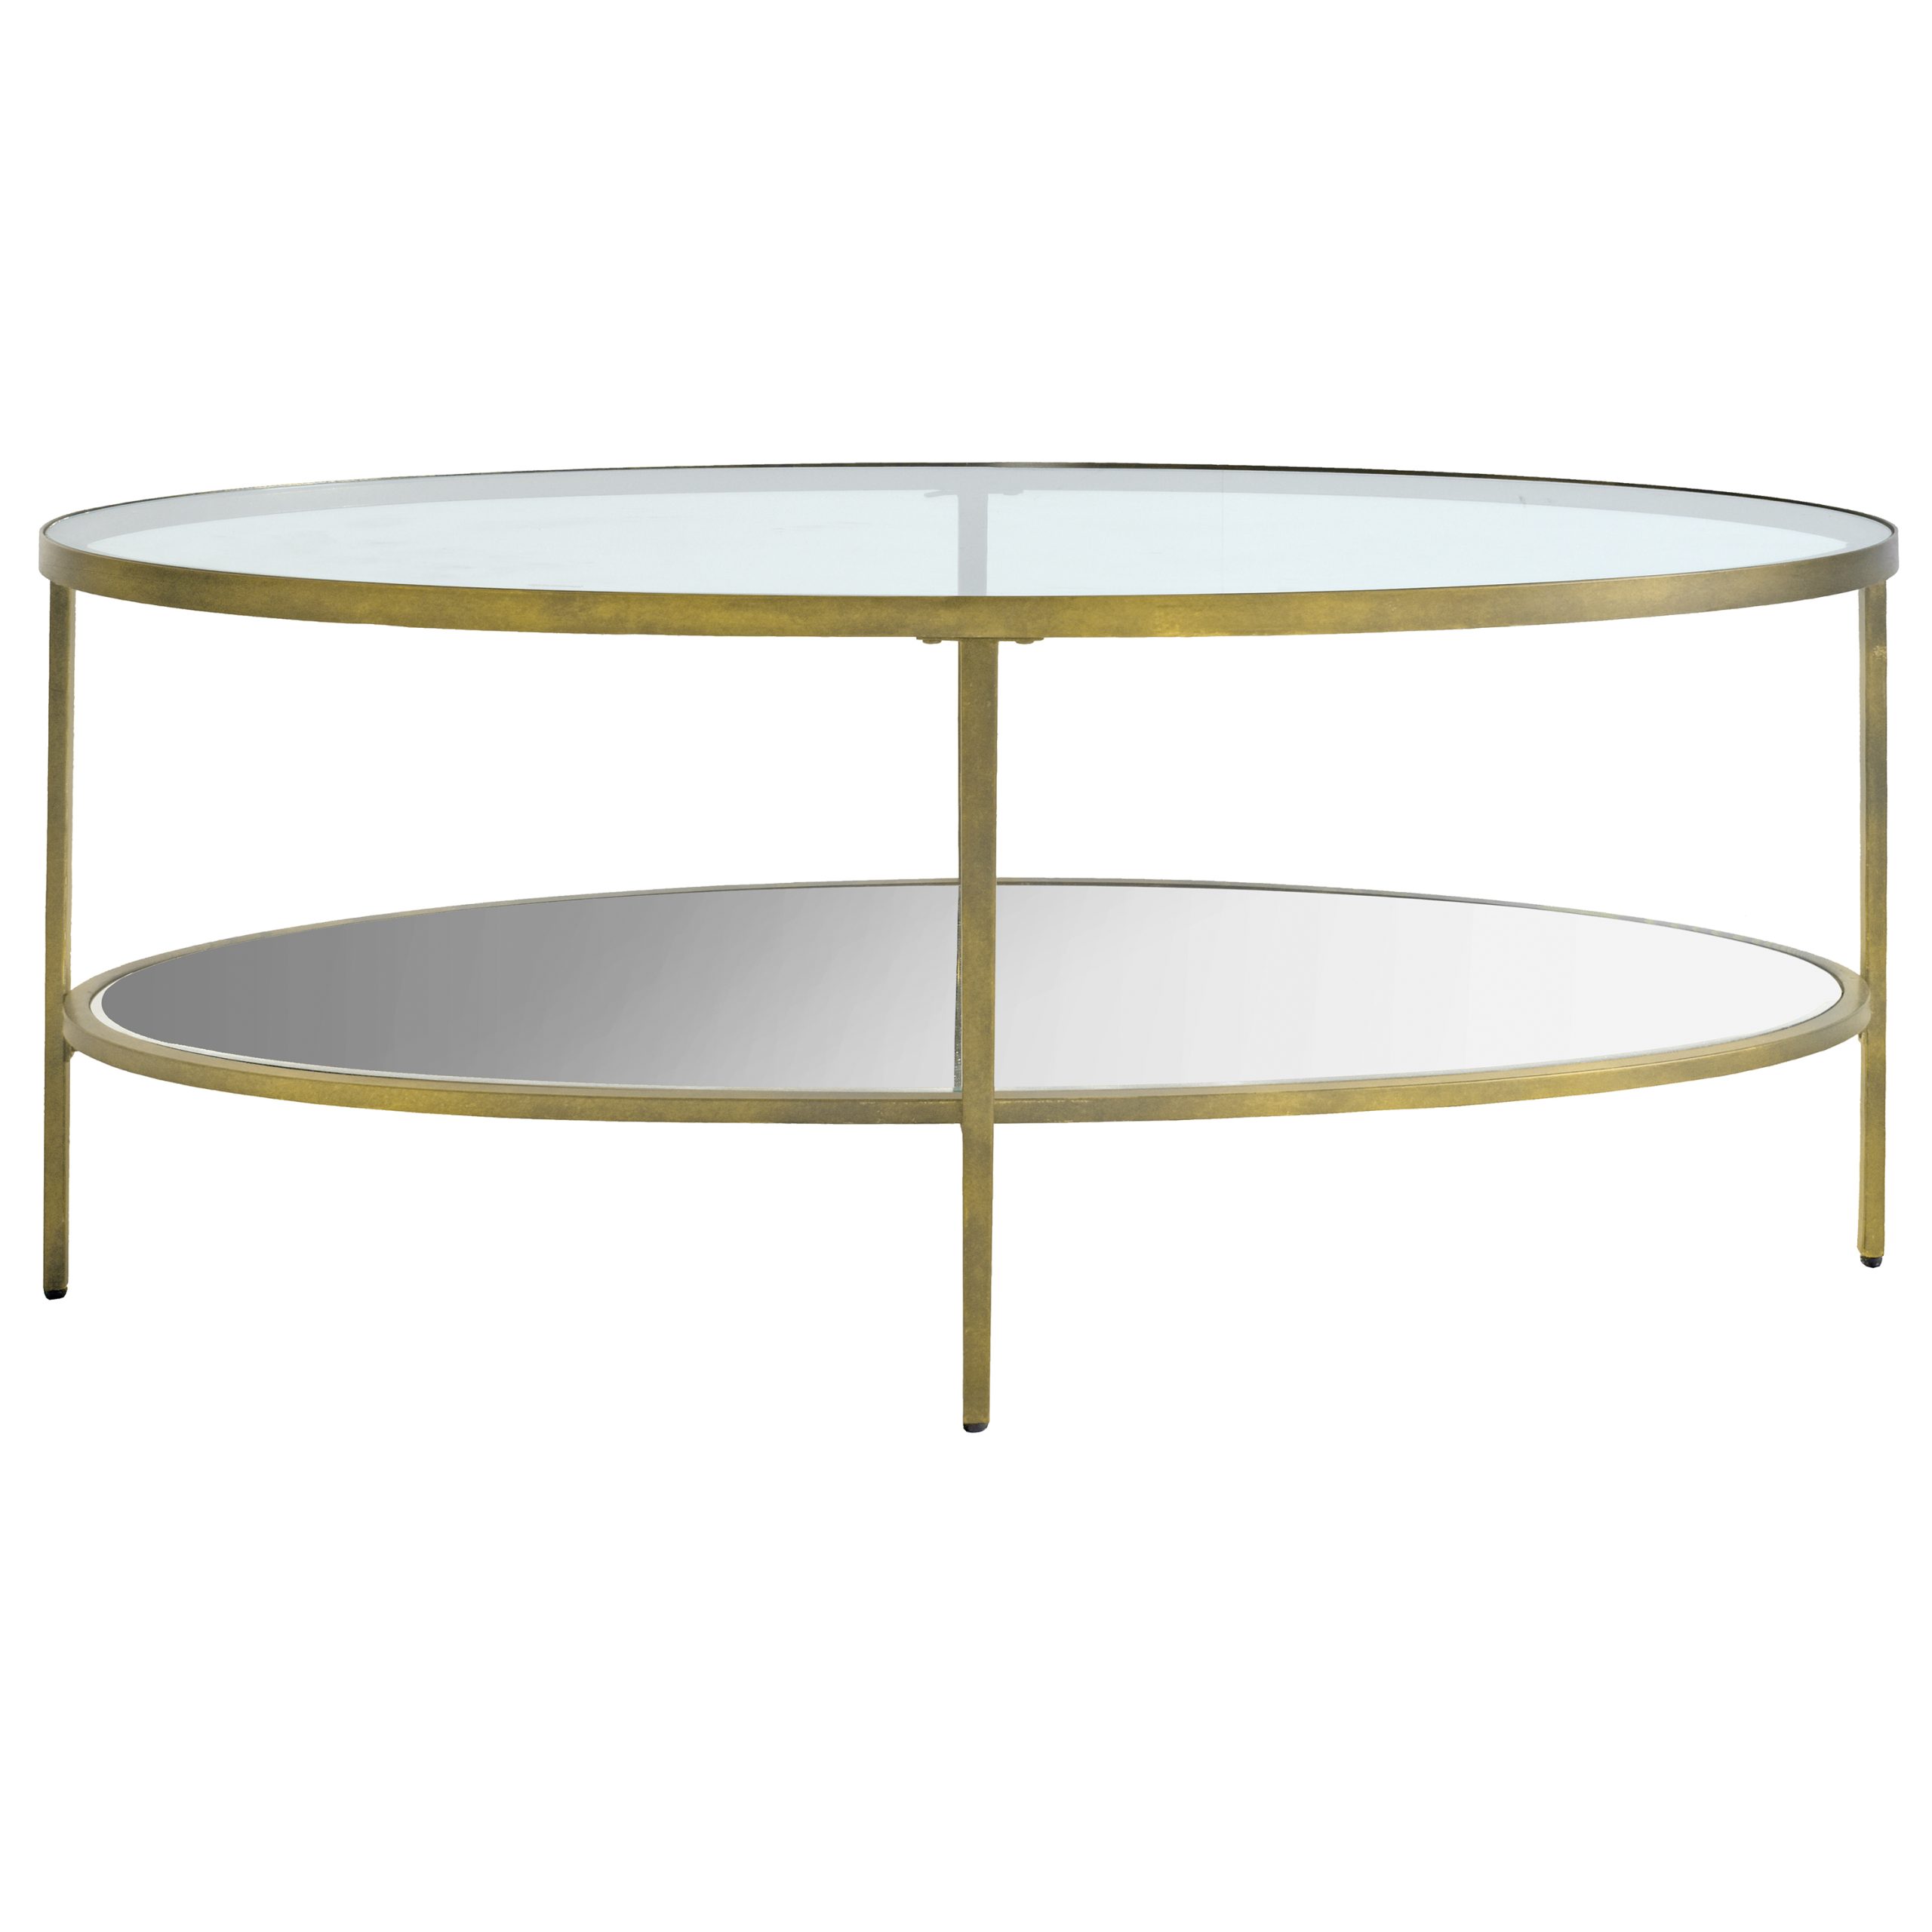 Gallery Direct Hudson Coffee Table Champagne